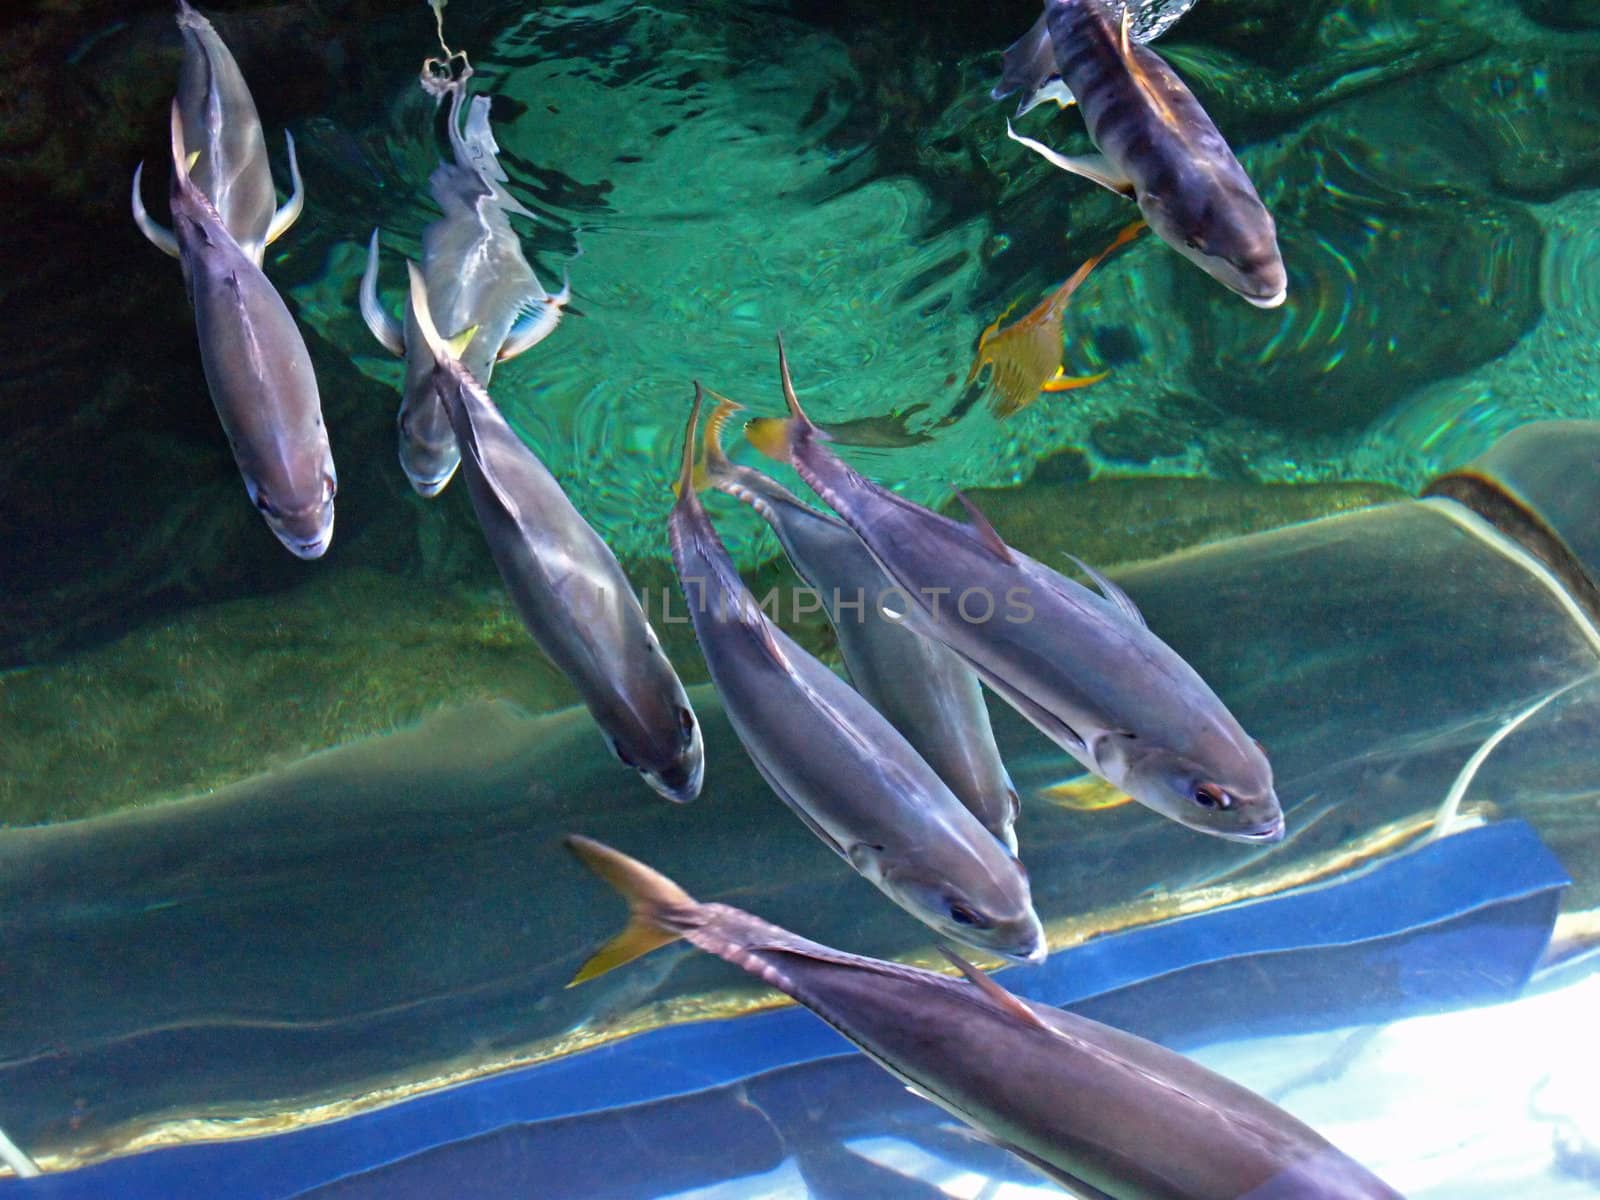 Fishes swimming through the water in an aquarium.